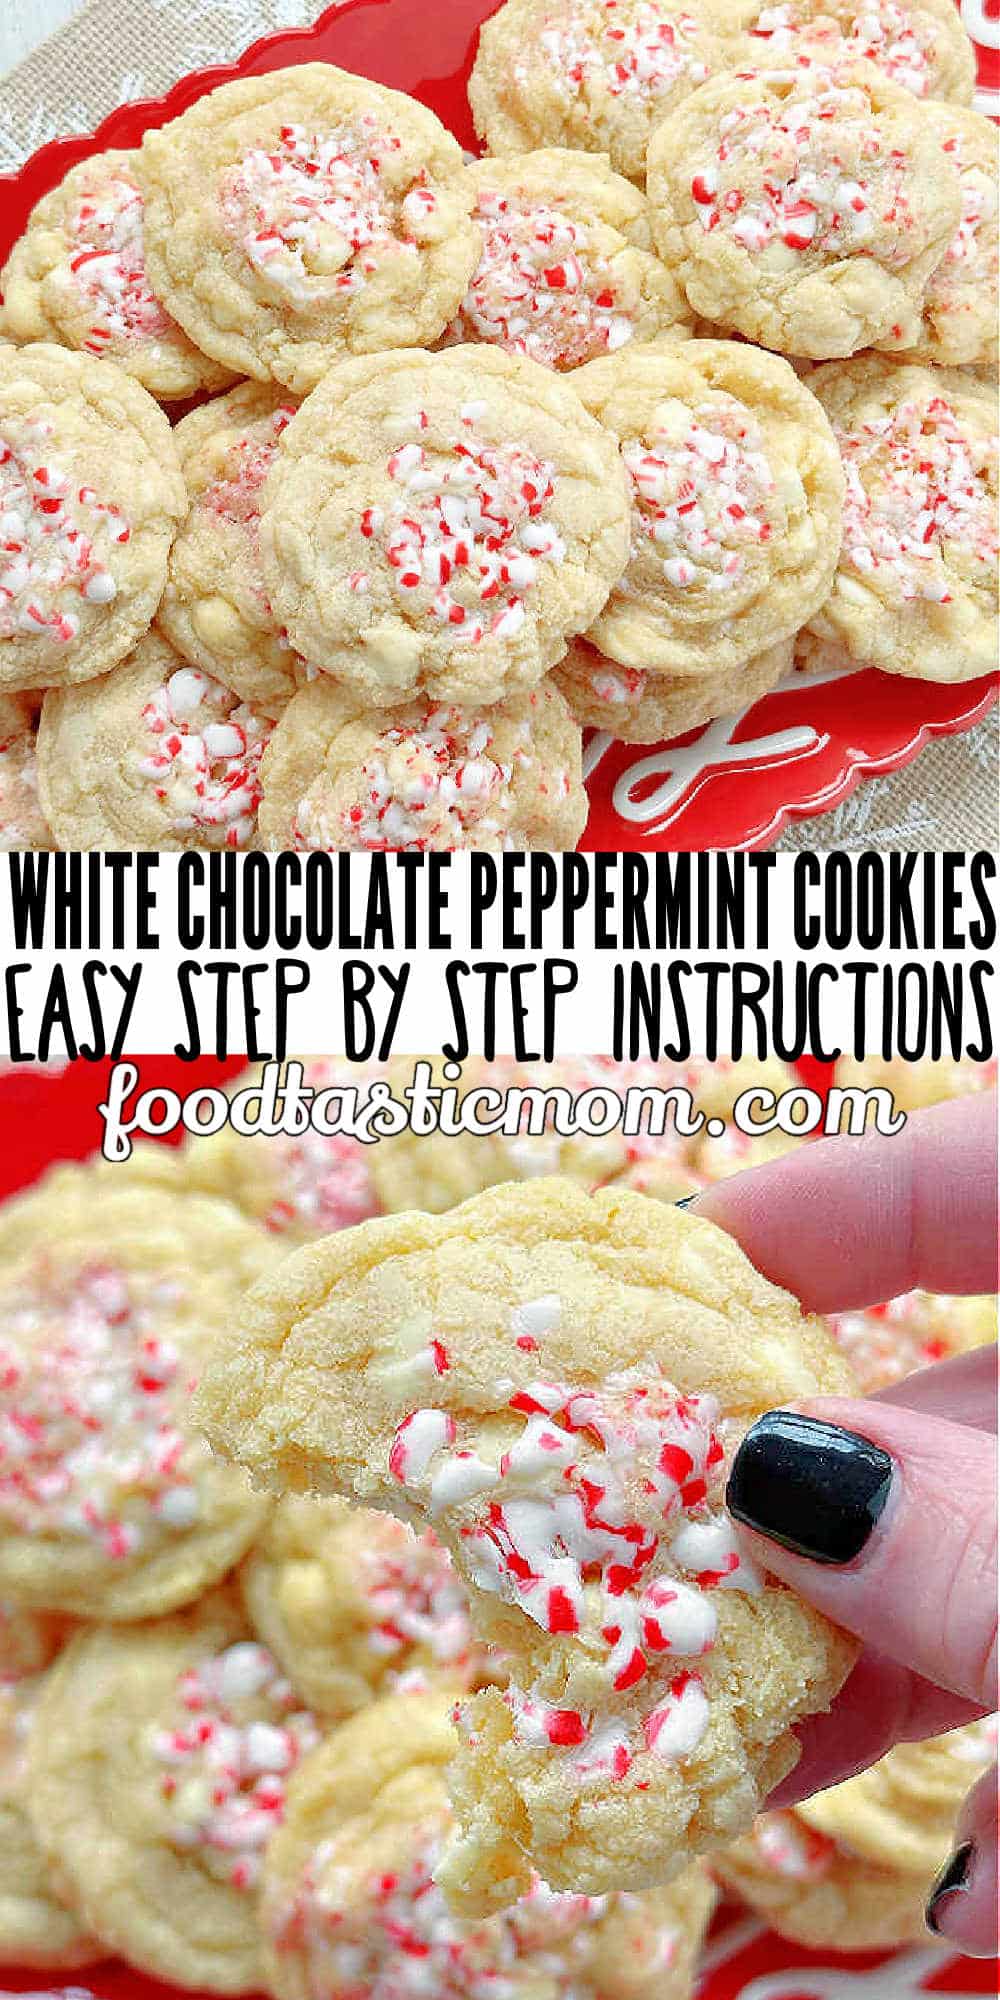 My White Chocolate Peppermint Cookies are famous. Crushed candy canes and white chocolate chips combine for the best Christmas cookie! via @foodtasticmom